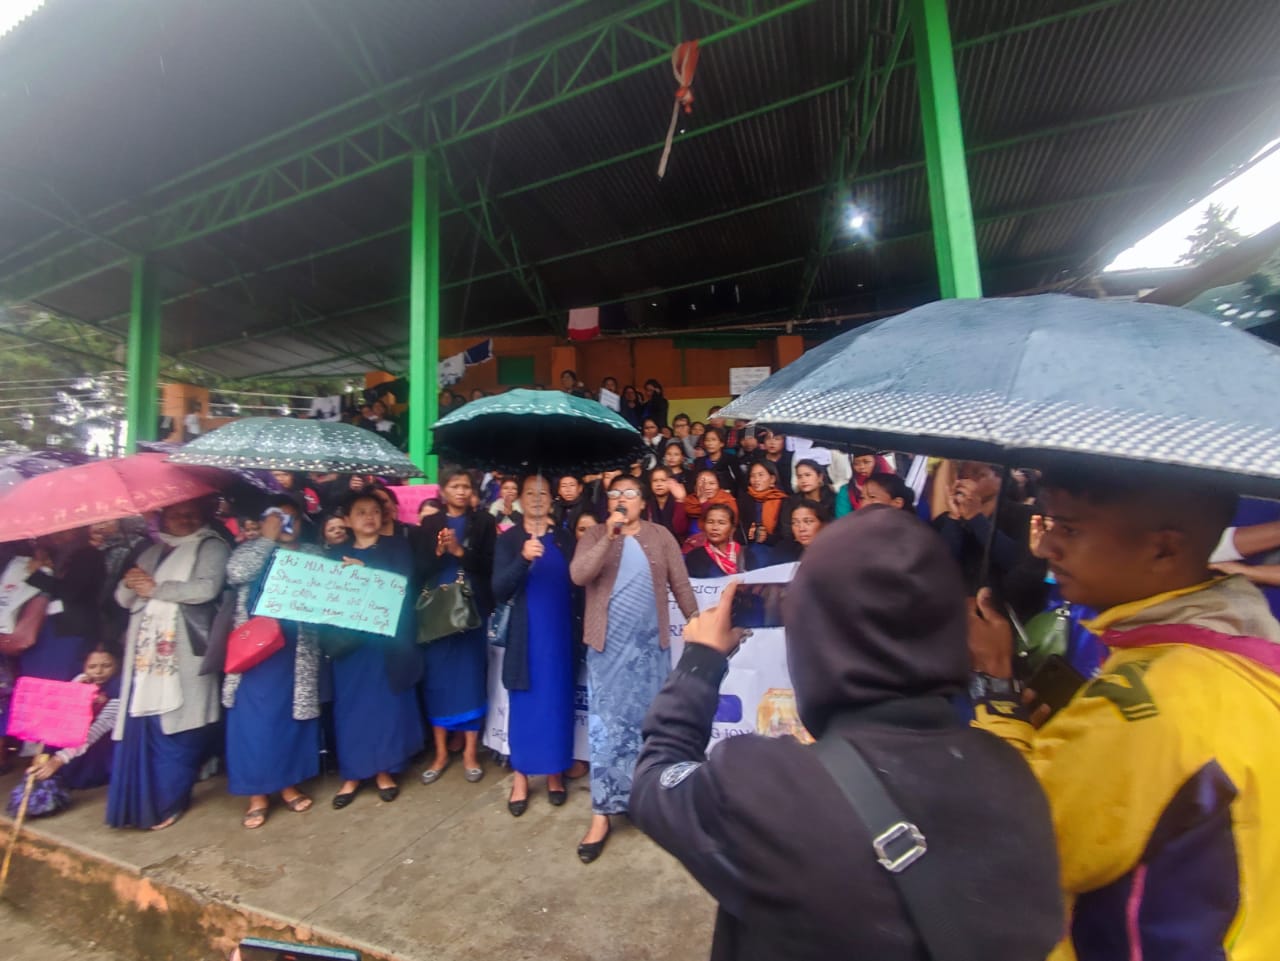 Meghalaya Asha Workers Union calls off proposed indefinite sit-in demonstration